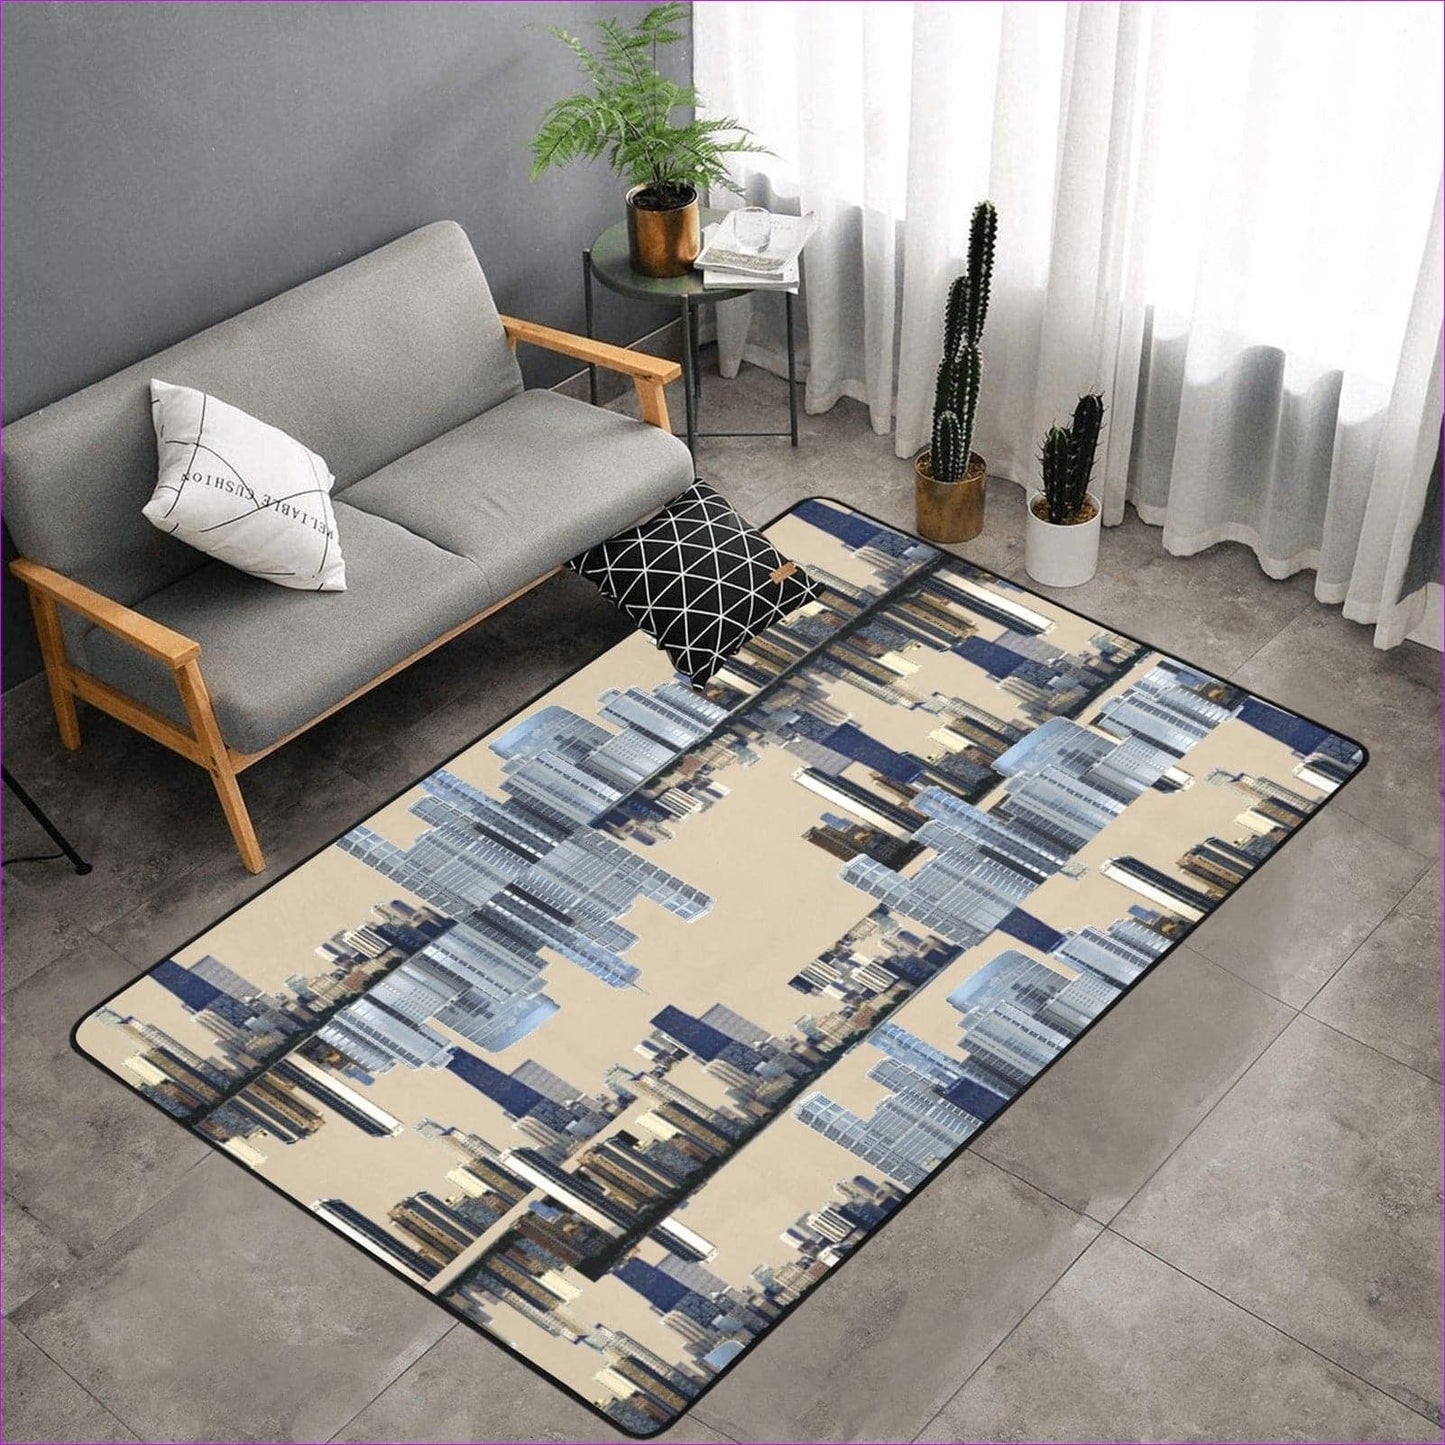 One Size city doubled Area Rug with Black Binding 7'x5' City Blocks Area Rug (4 colors) - area rug at TFC&H Co.